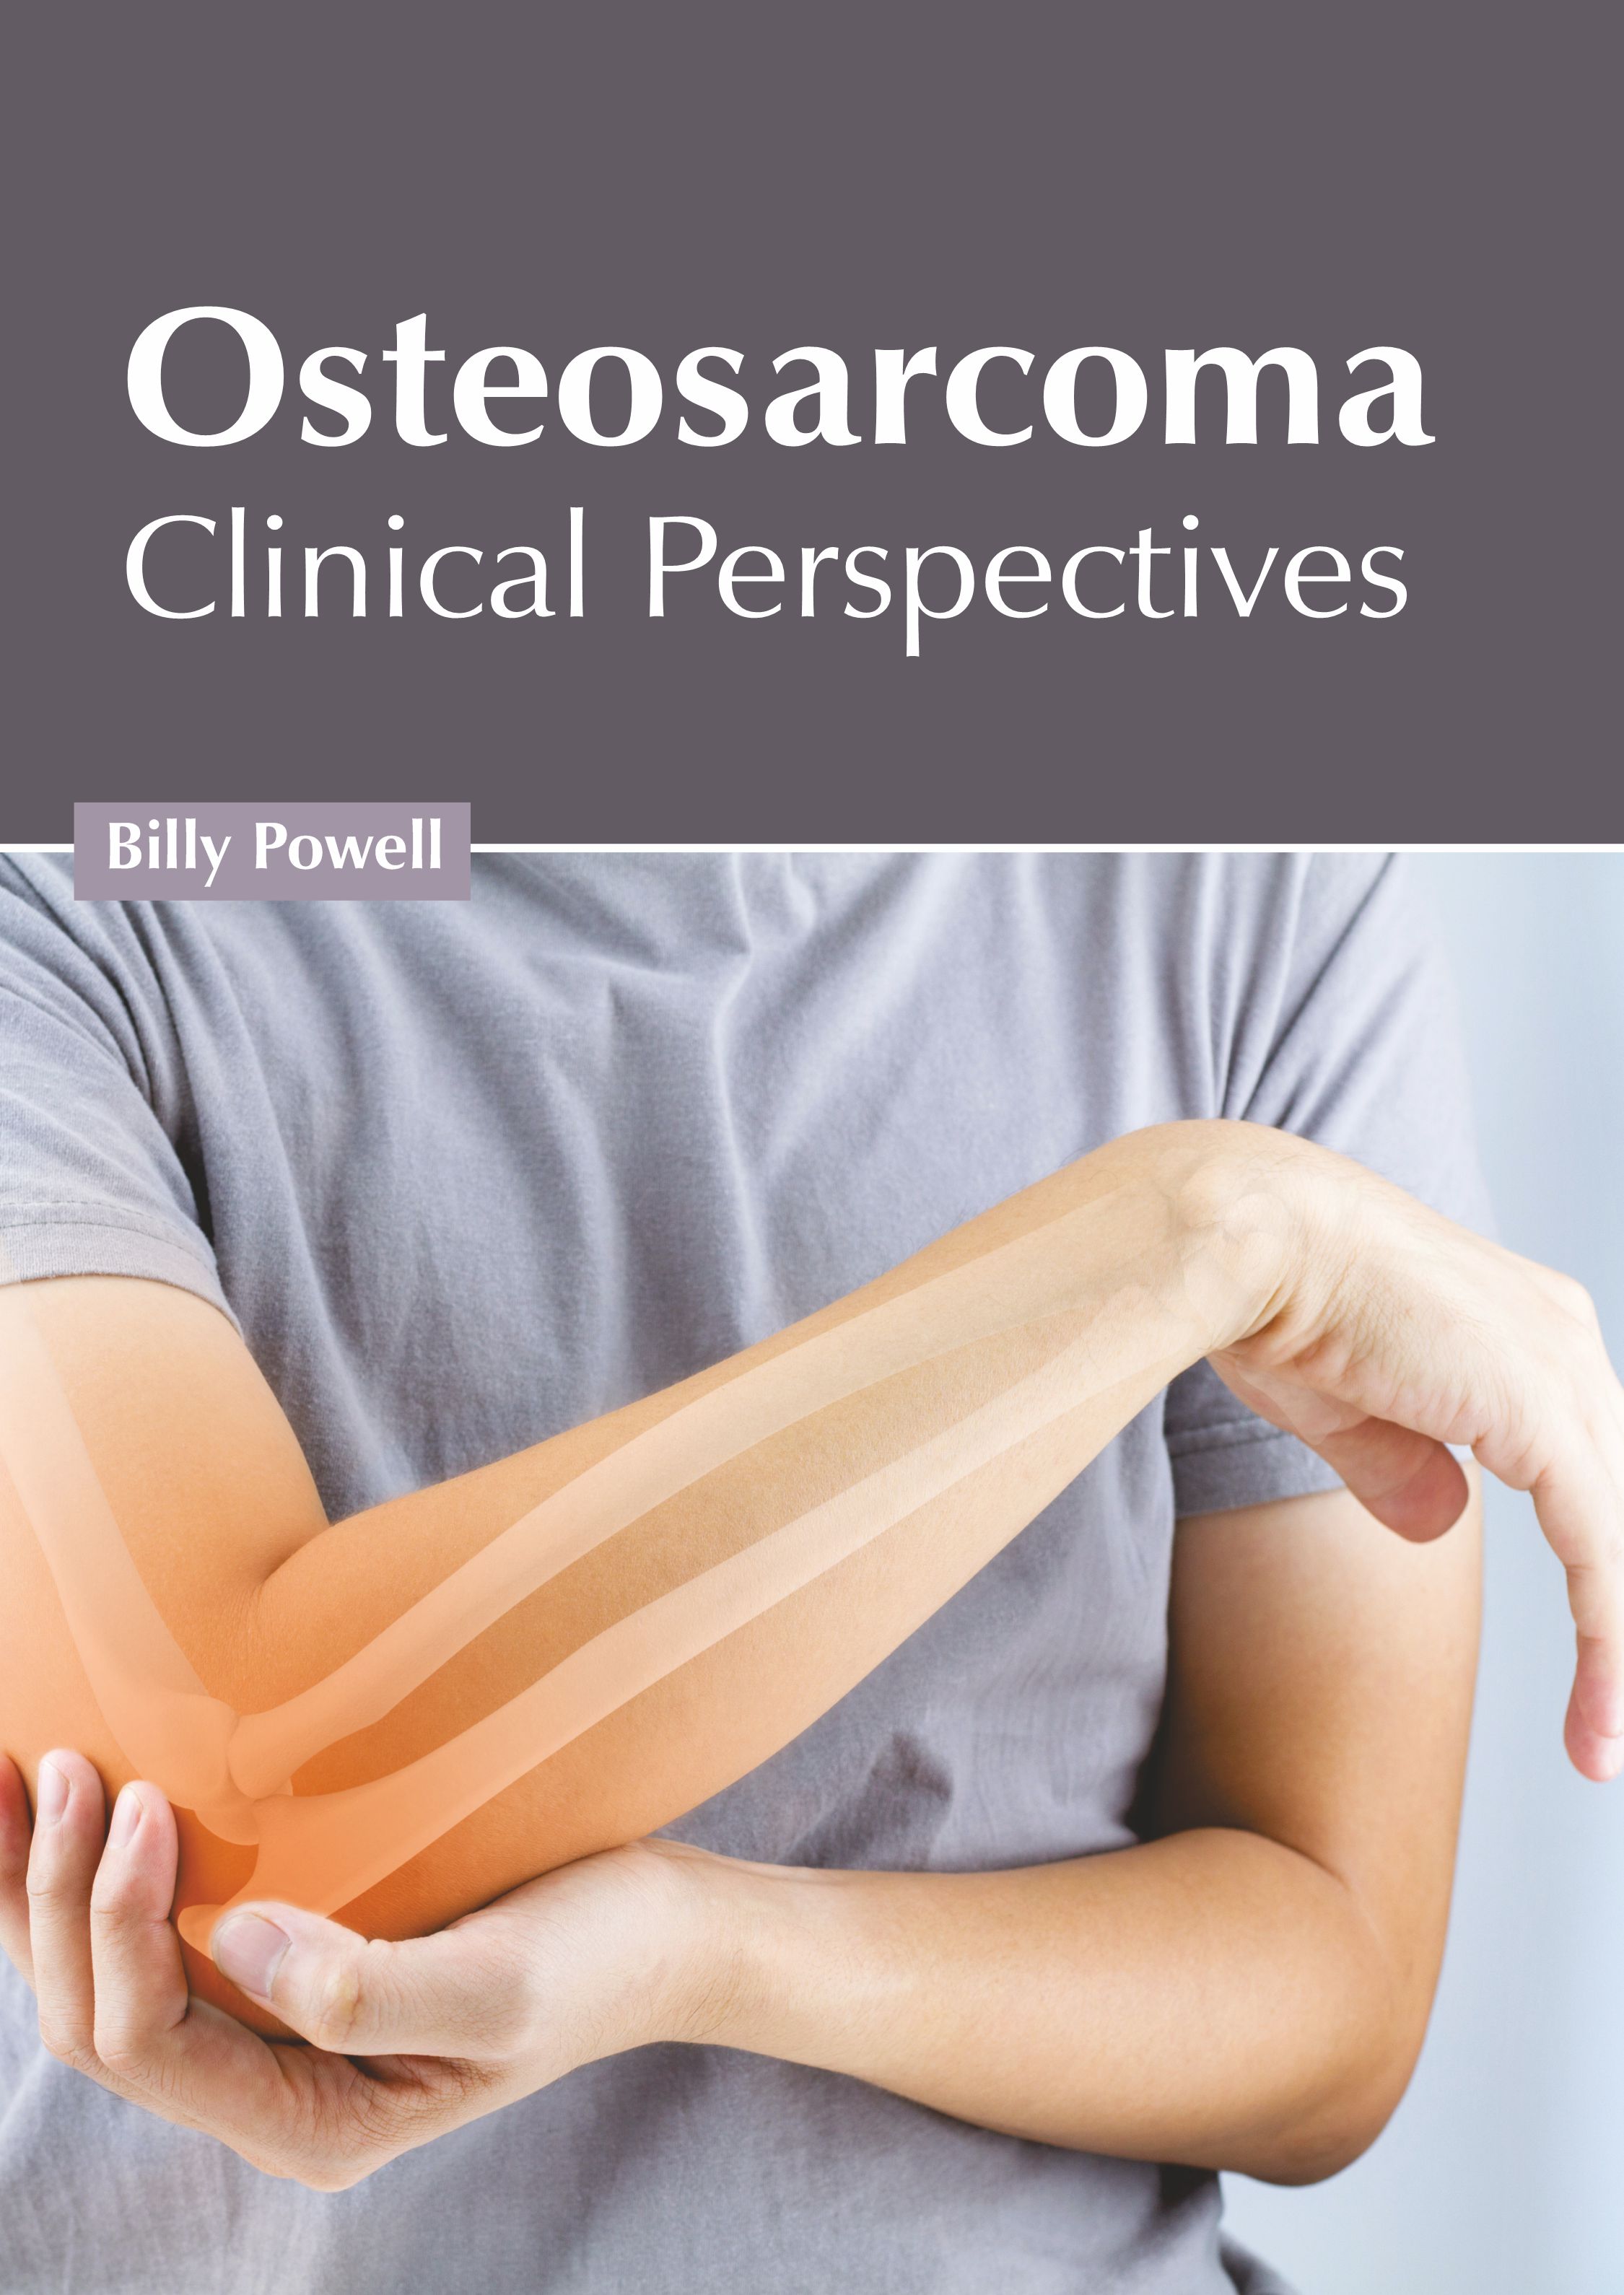 OSTEOSARCOMA: CLINICAL PERSPECTIVES